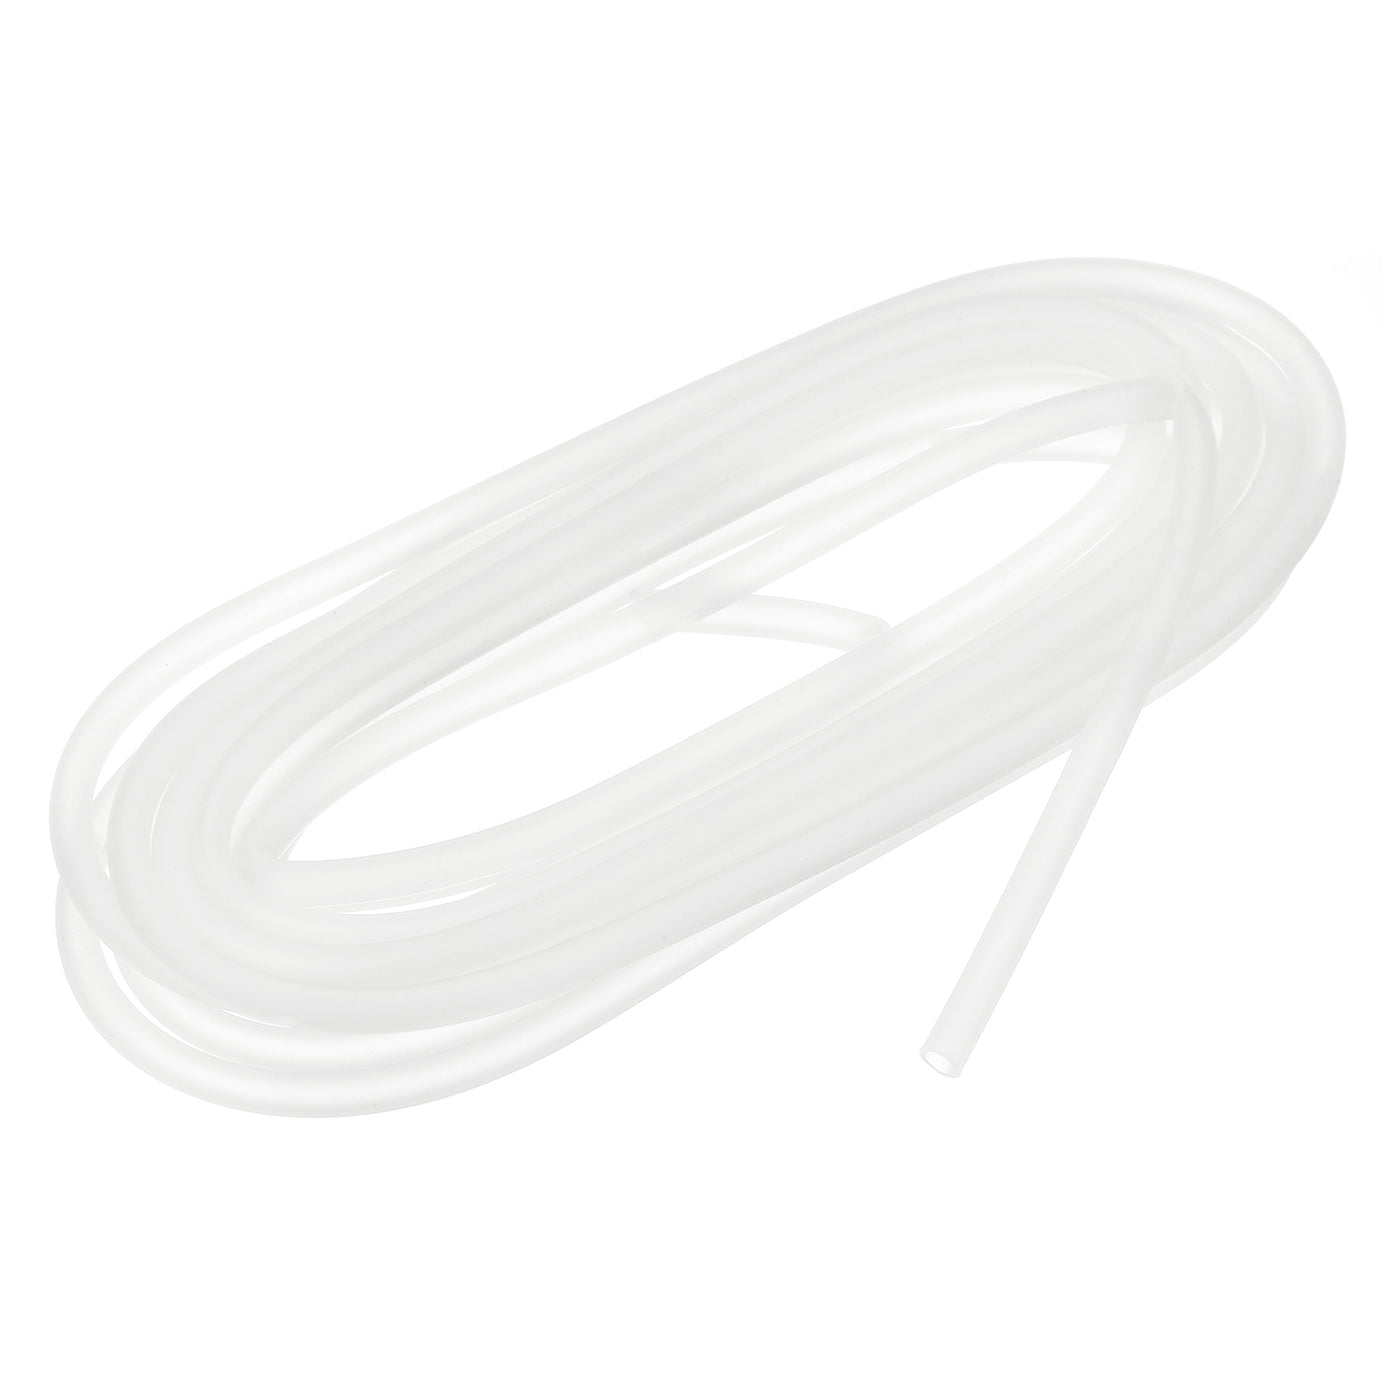 uxcell Uxcell Silicone Tubing 5/32" ID, 15/64" OD 1Pcs 13.12 Ft for Pump Transfer, White